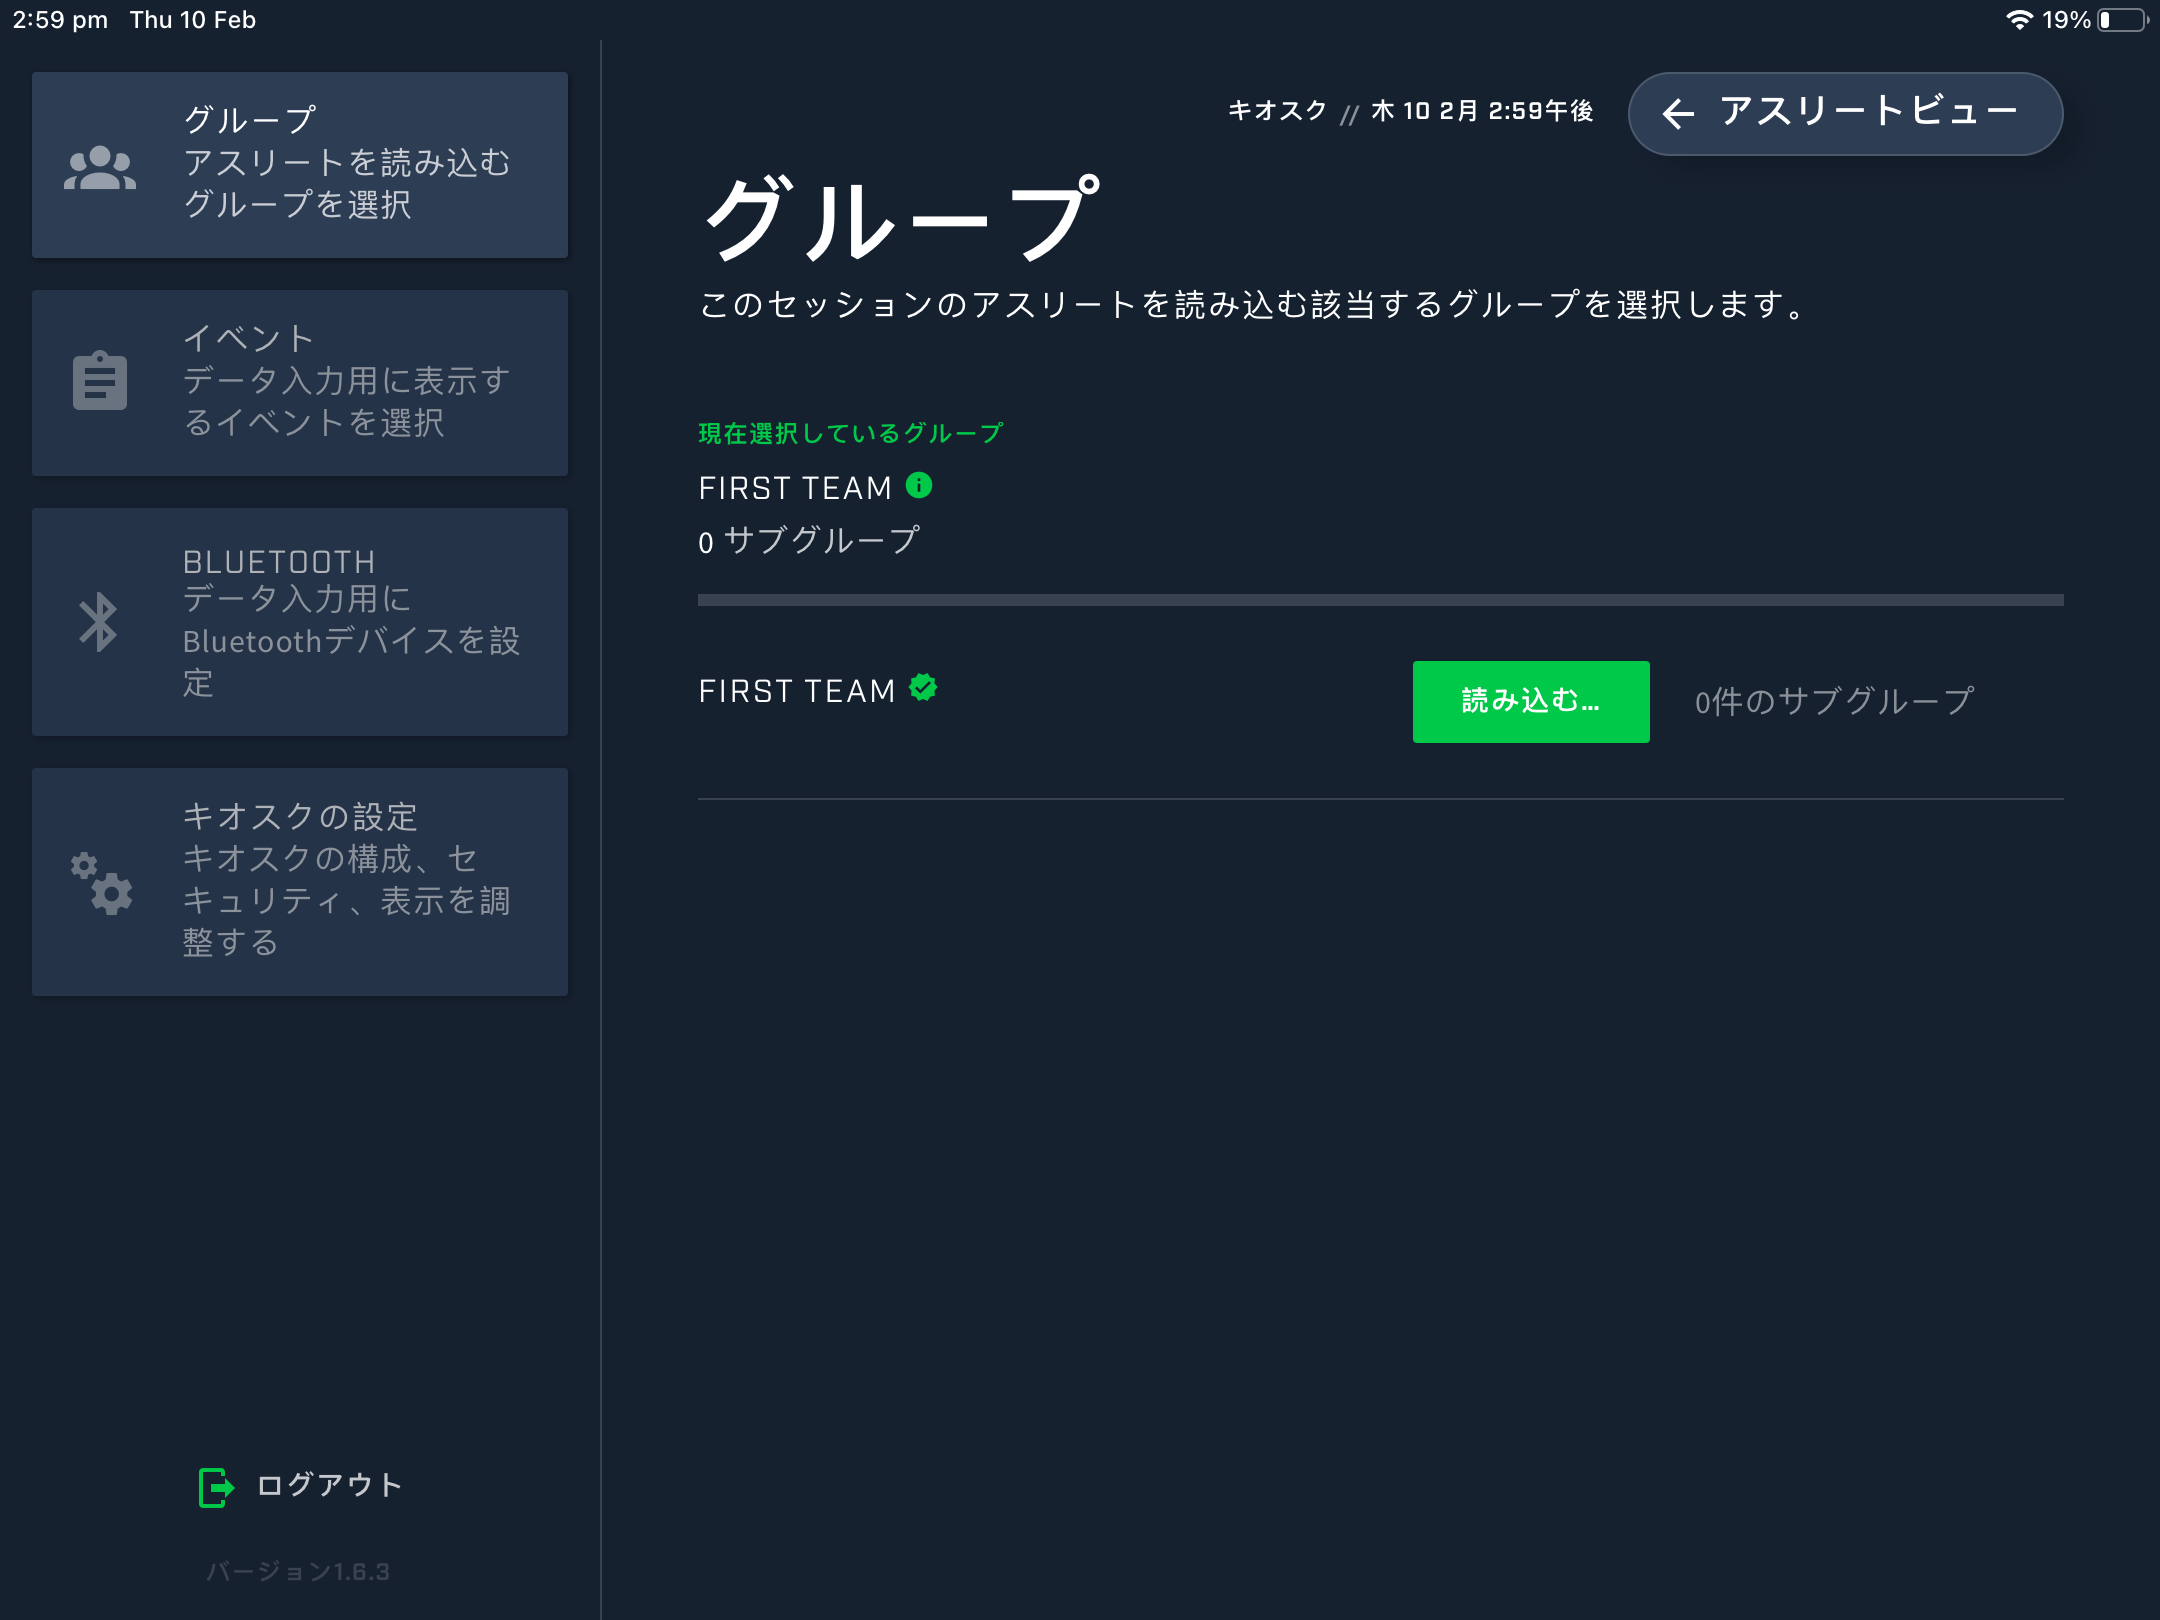 A screenshot showing the Groups setting screen on the Kiosk app when language is set to Japanese.